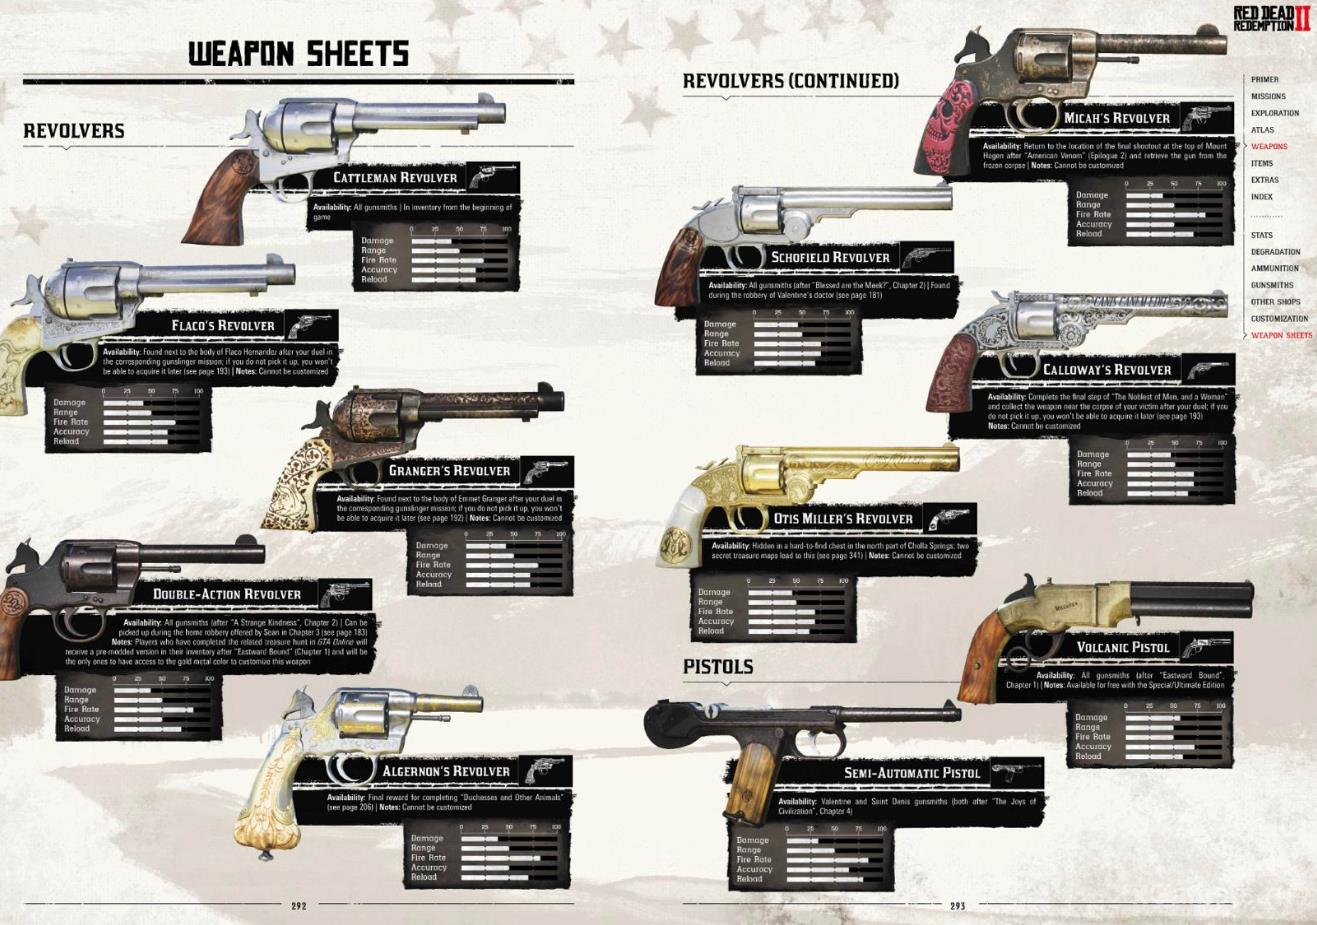 List of revolvers used in the game Red Dead Redemption 2